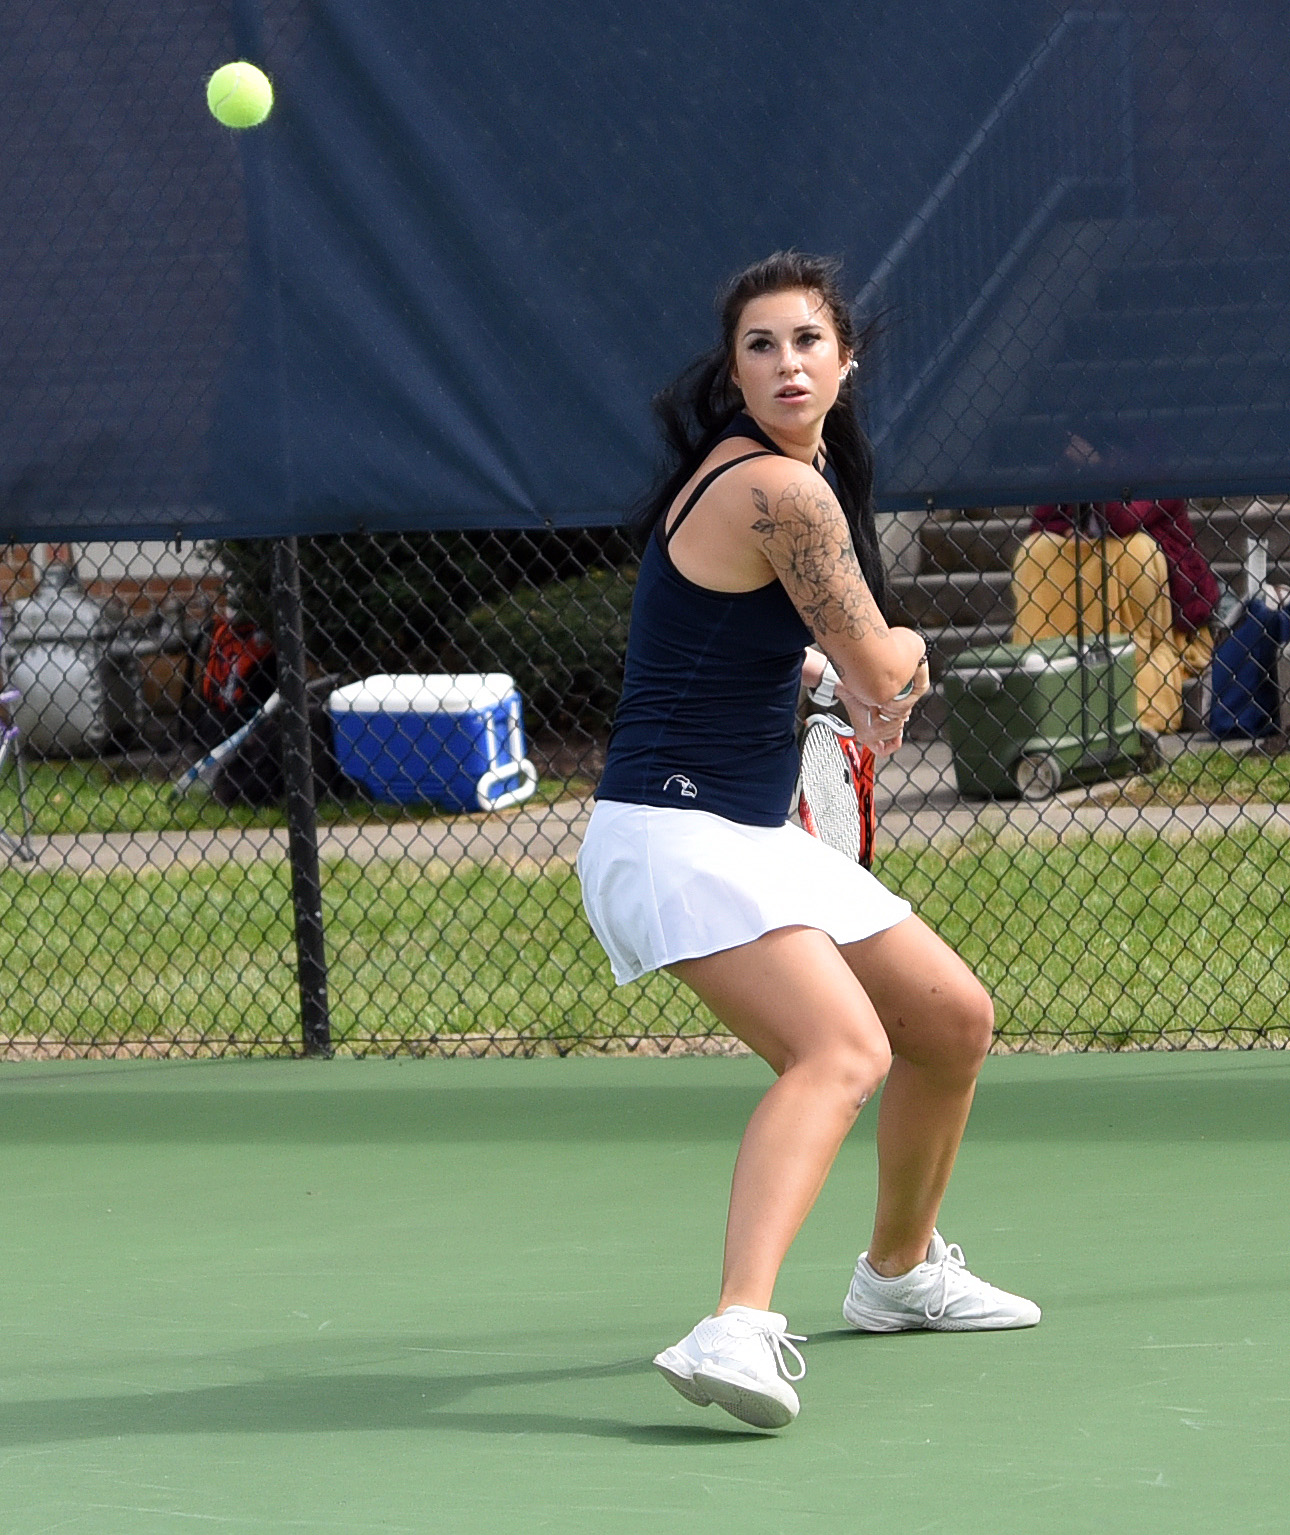 Rainy Sunday moves tennis match inside, but Eagles come out on top